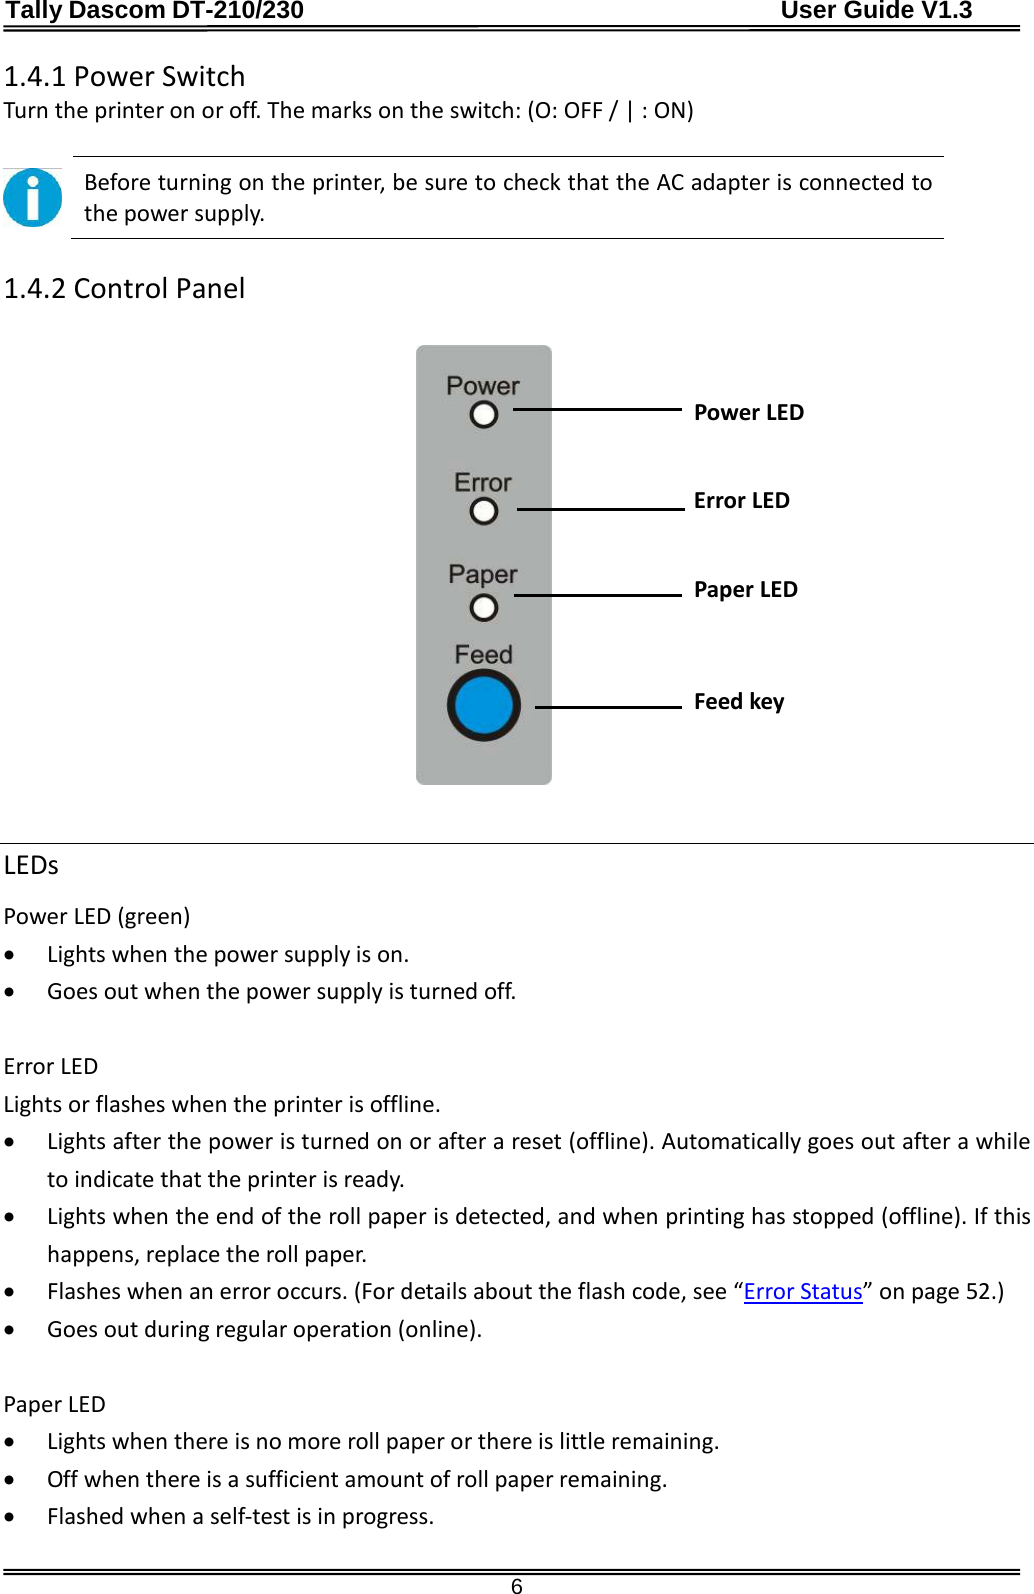 Tally Dascom DT-210/230                                      User Guide V1.3  6 1.4.1 Power Switch Turn the printer on or off. The marks on the switch: (O: OFF / | : ON)   Before turning on the printer, be sure to check that the AC adapter is connected to the power supply.  1.4.2 Control Panel                                Power LED   Error LED   Paper LED  Feed key   LEDs Power LED (green) • Lights when the power supply is on. • Goes out when the power supply is turned off.  Error LED Lights or flashes when the printer is offline. • Lights after the power is turned on or after a reset (offline). Automatically goes out after a while to indicate that the printer is ready. • Lights when the end of the roll paper is detected, and when printing has stopped (offline). If this happens, replace the roll paper. • Flashes when an error occurs. (For details about the flash code, see “Error Status” on page 52.) • Goes out during regular operation (online).  Paper LED • Lights when there is no more roll paper or there is little remaining. • Off when there is a sufficient amount of roll paper remaining. • Flashed when a self-test is in progress.  